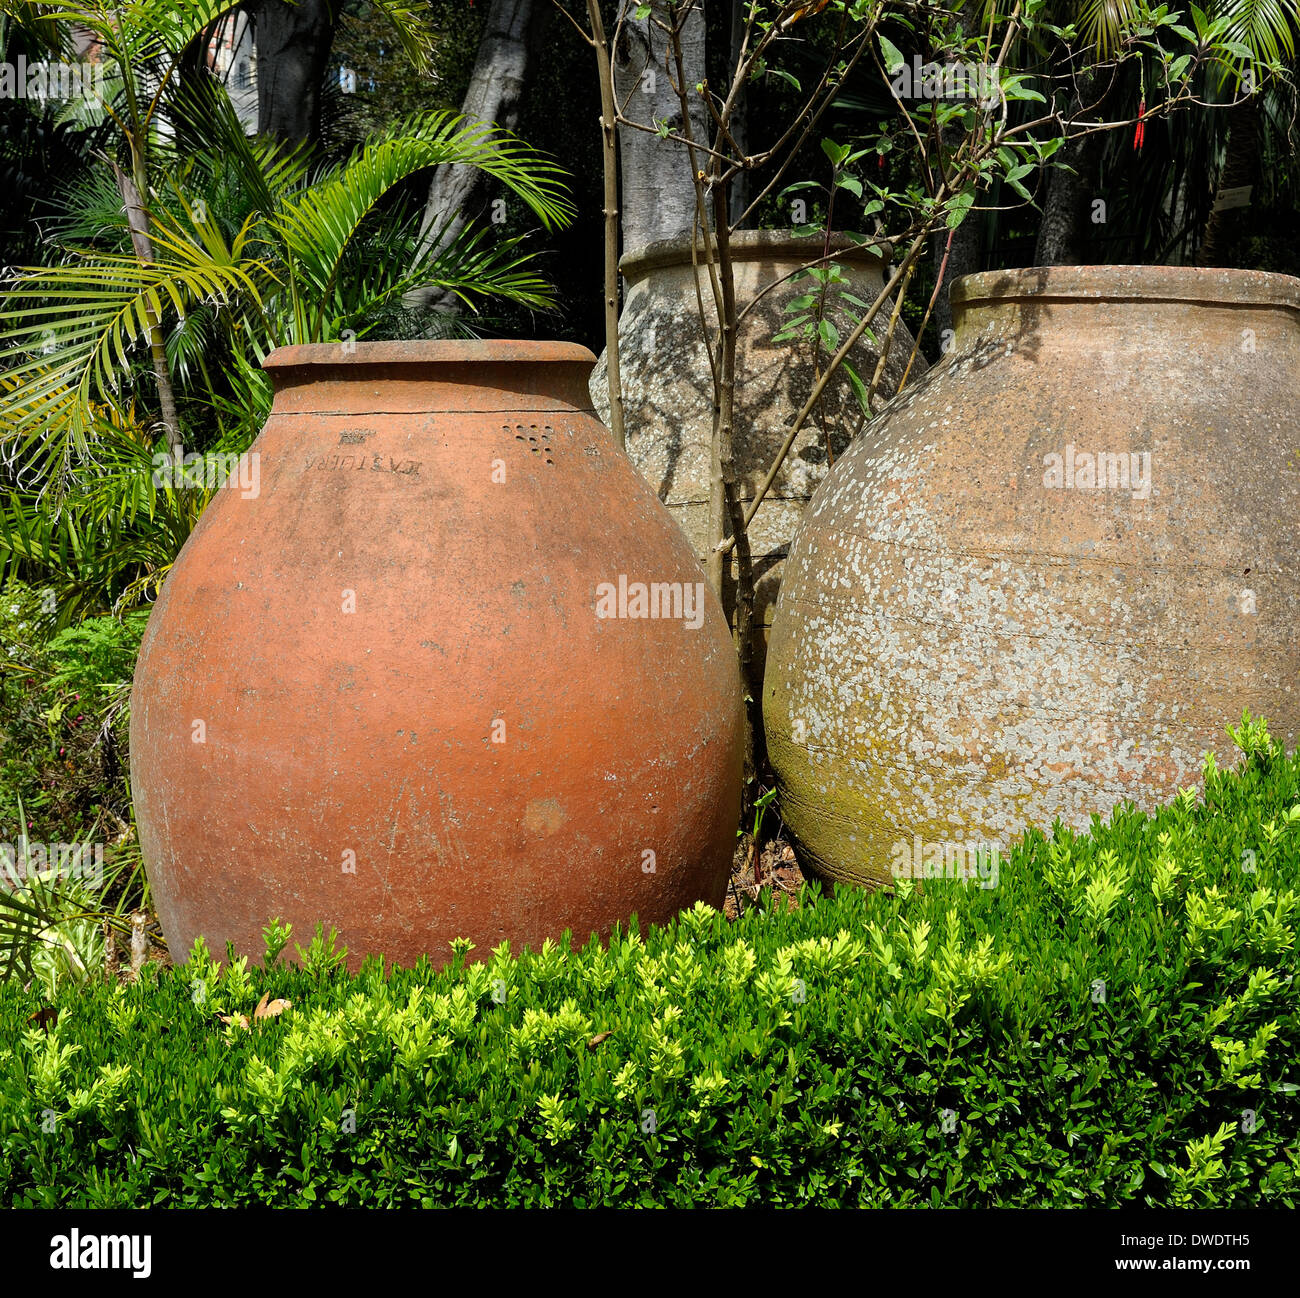 Funchal Madeira Monte palace tropical gardens large terracotta pots Stock  Photo - Alamy